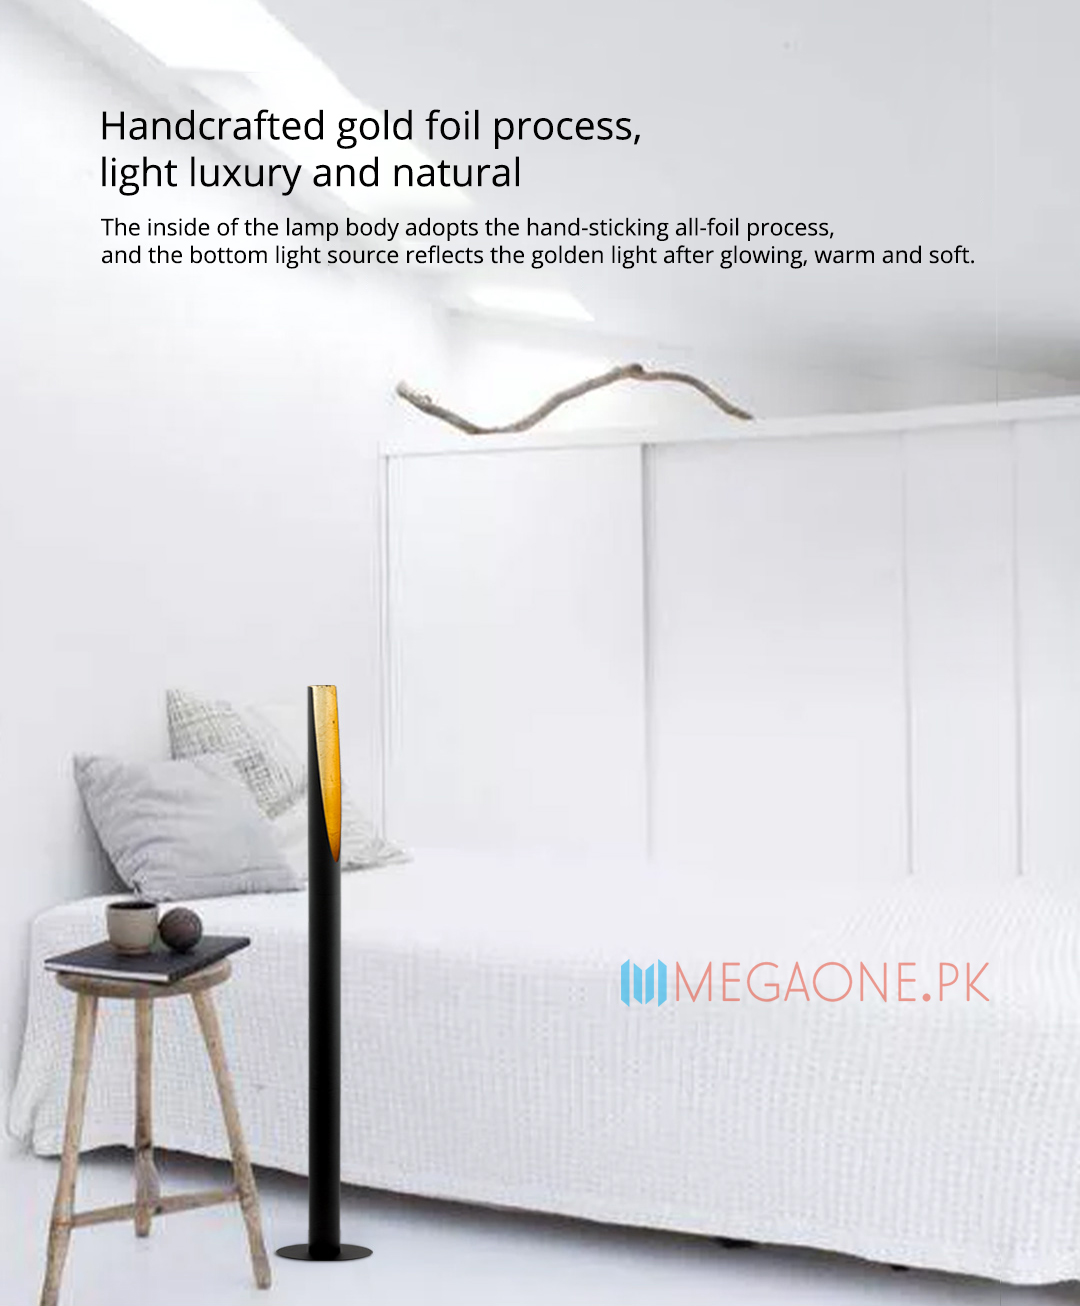 The inside of the lamp body adopts the hand-sticking all-foil process, and the bottom light source reflects the golden light after glowing, warm and soft.